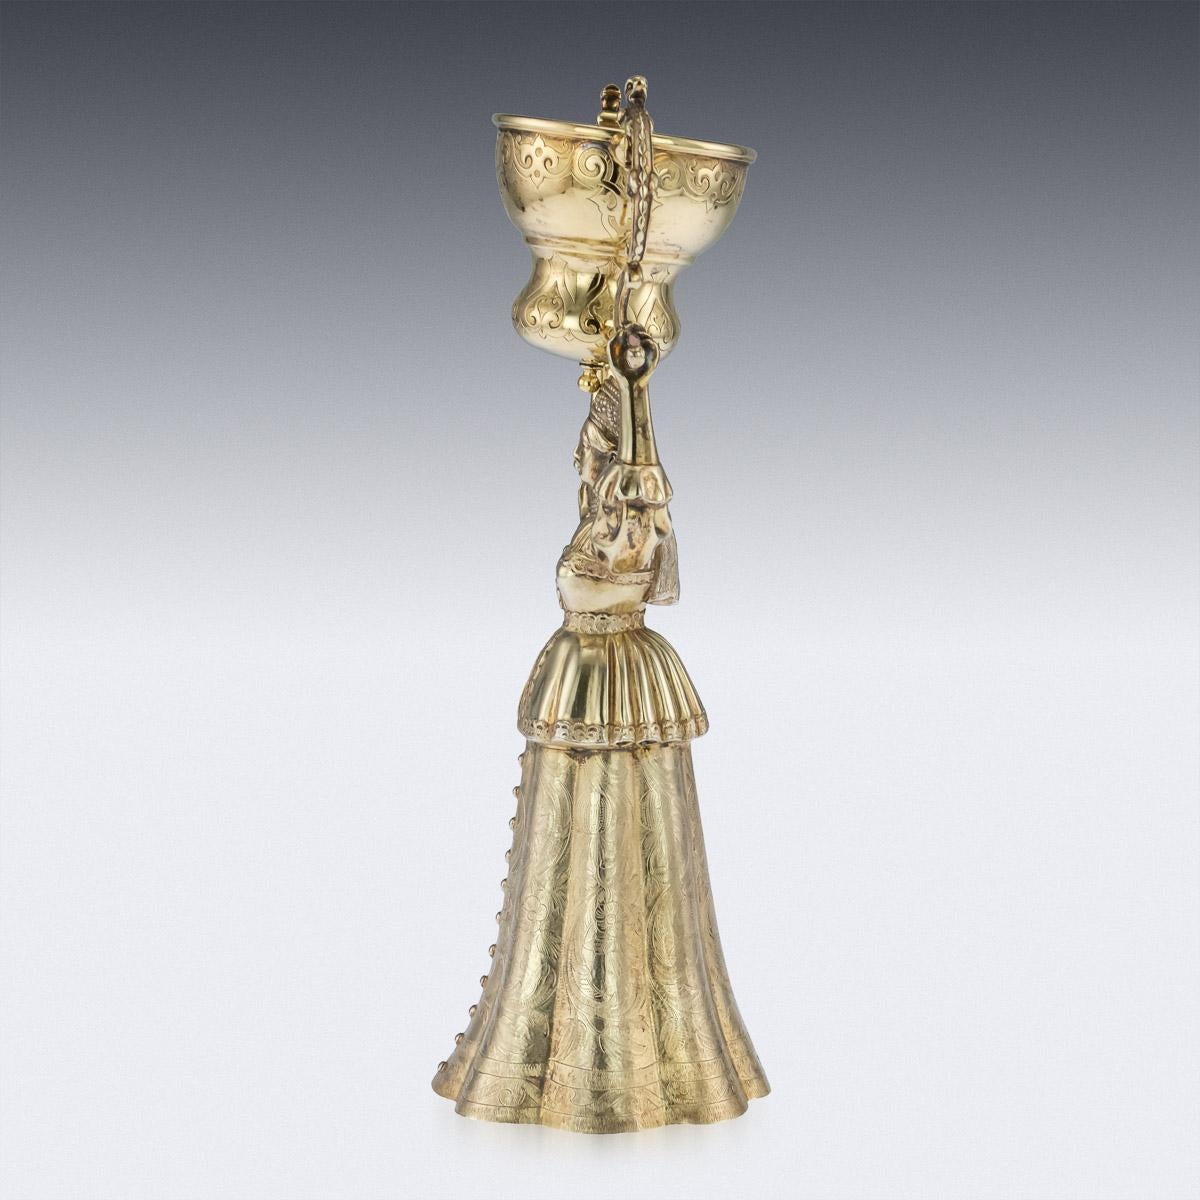 Antique 19th century Victorian solid silver-gilt Wager / Marriage cup, the cups design inspired by the early 16th century German example, modelled as a female figure supporting over her head a smalled domed swiveling cup and the lower cups half